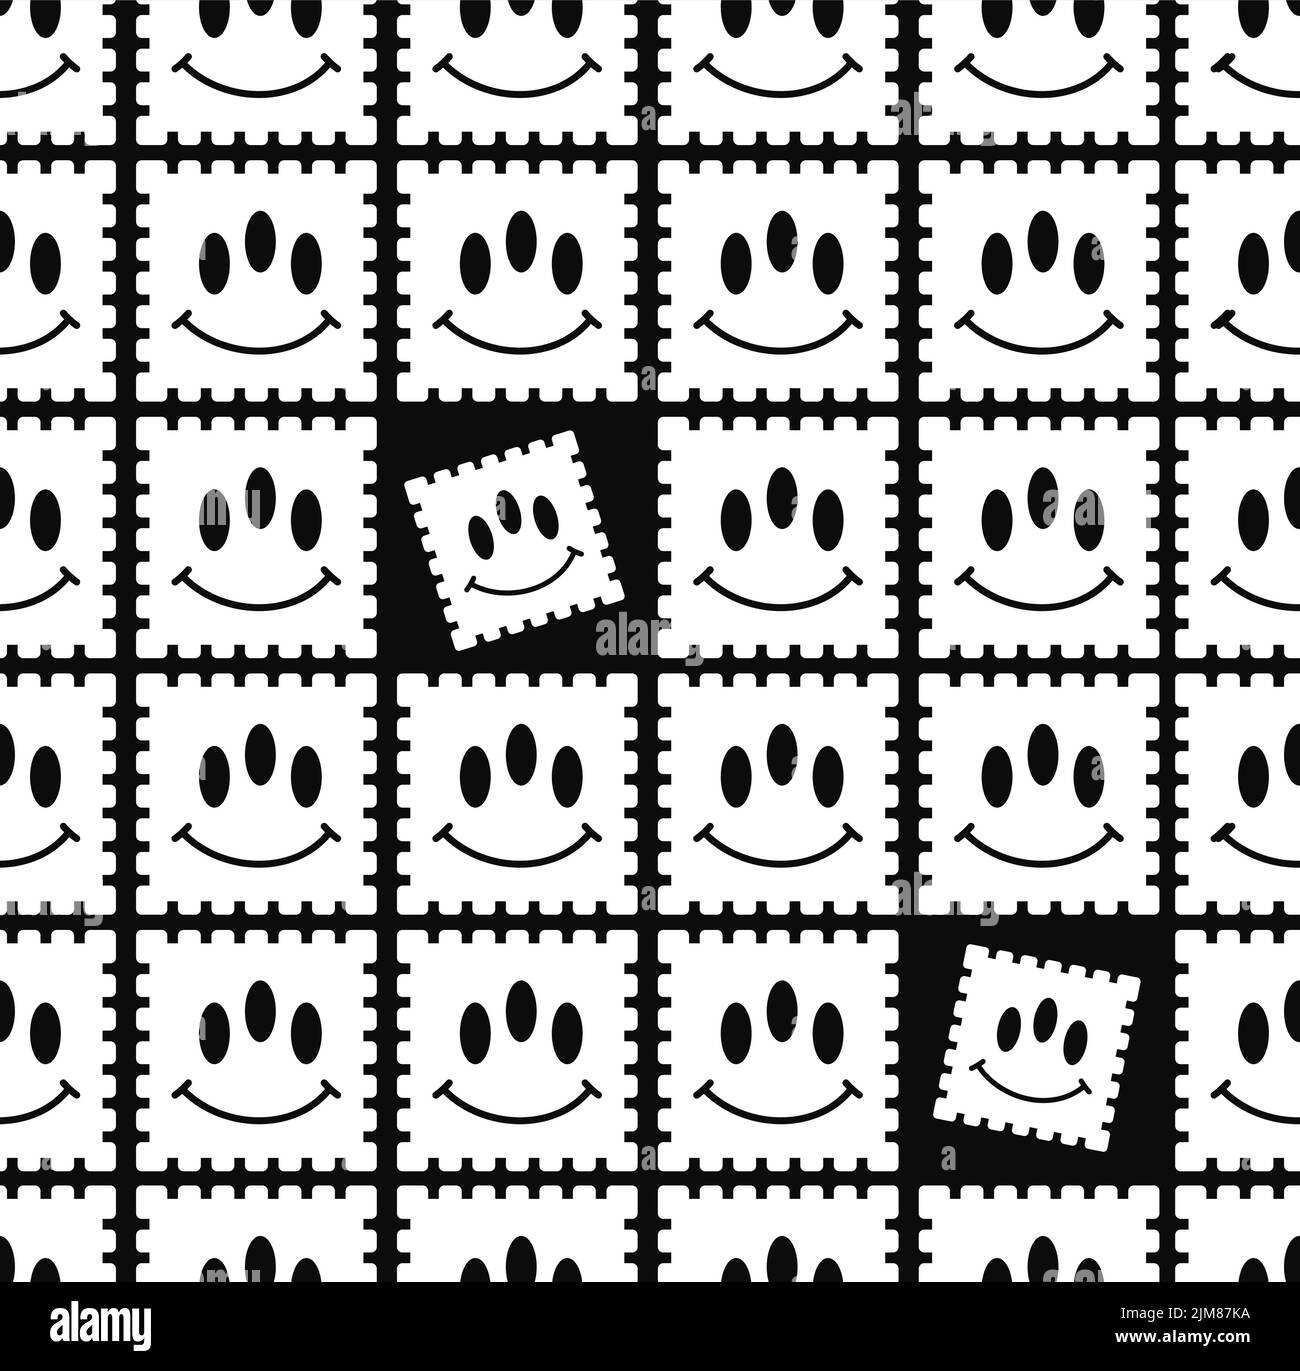 Acid lsd paper blotter marks with smile face seamless pattern. Vector hand drawn doodle style cartoon background illustration. Trippy acid,lsd marks,smile face seamless pattern wallpaper print concept Stock Vector